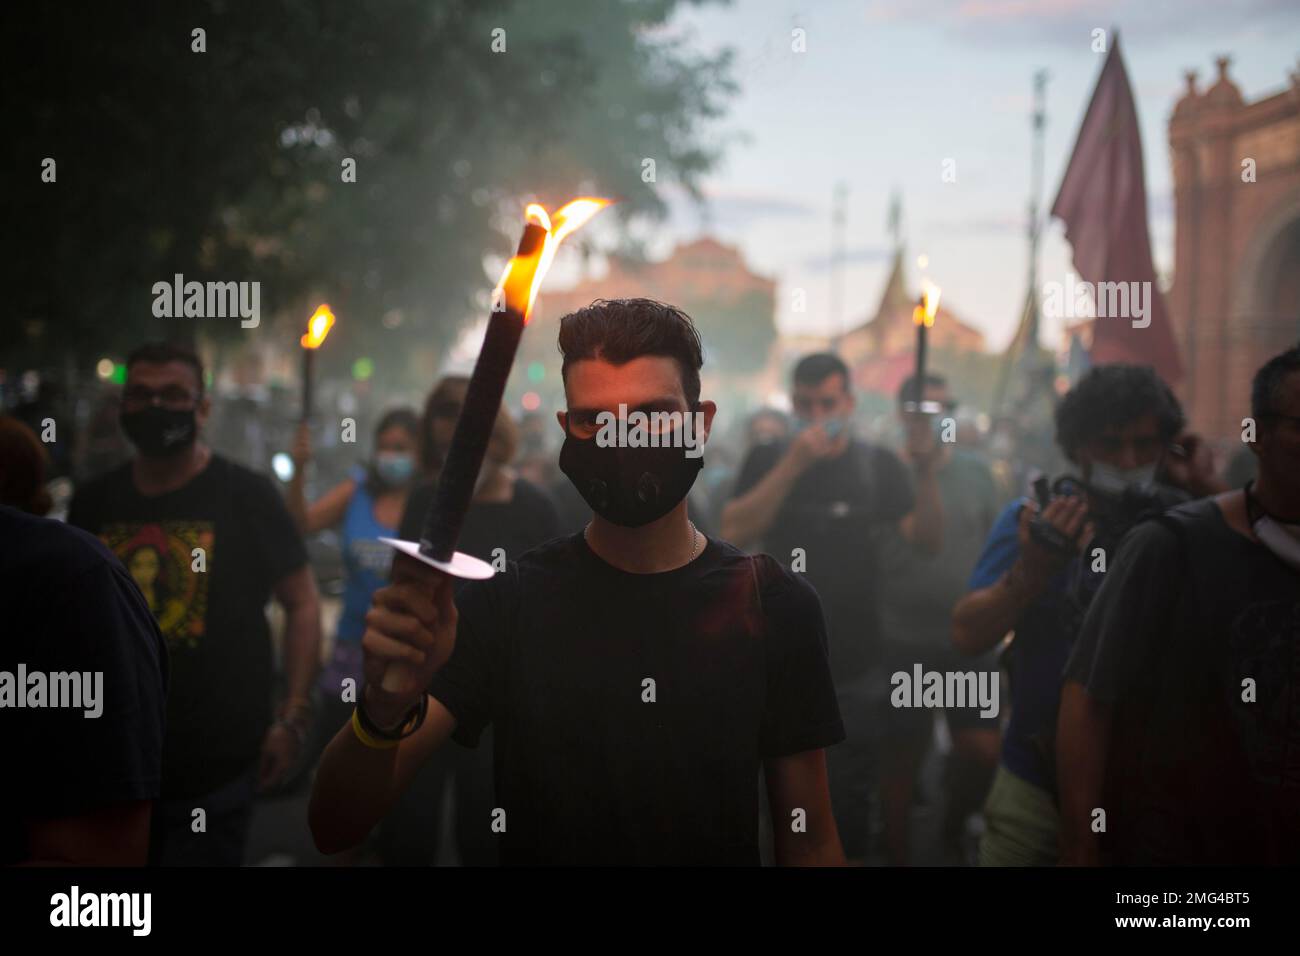 Pro-independent supporters, some of them holding torches, march during the  Catalan National Day in Barcelona, Spain, Friday, Sept. 11, 2020. Thousands  of Catalans who support secession from the rest of Spain have